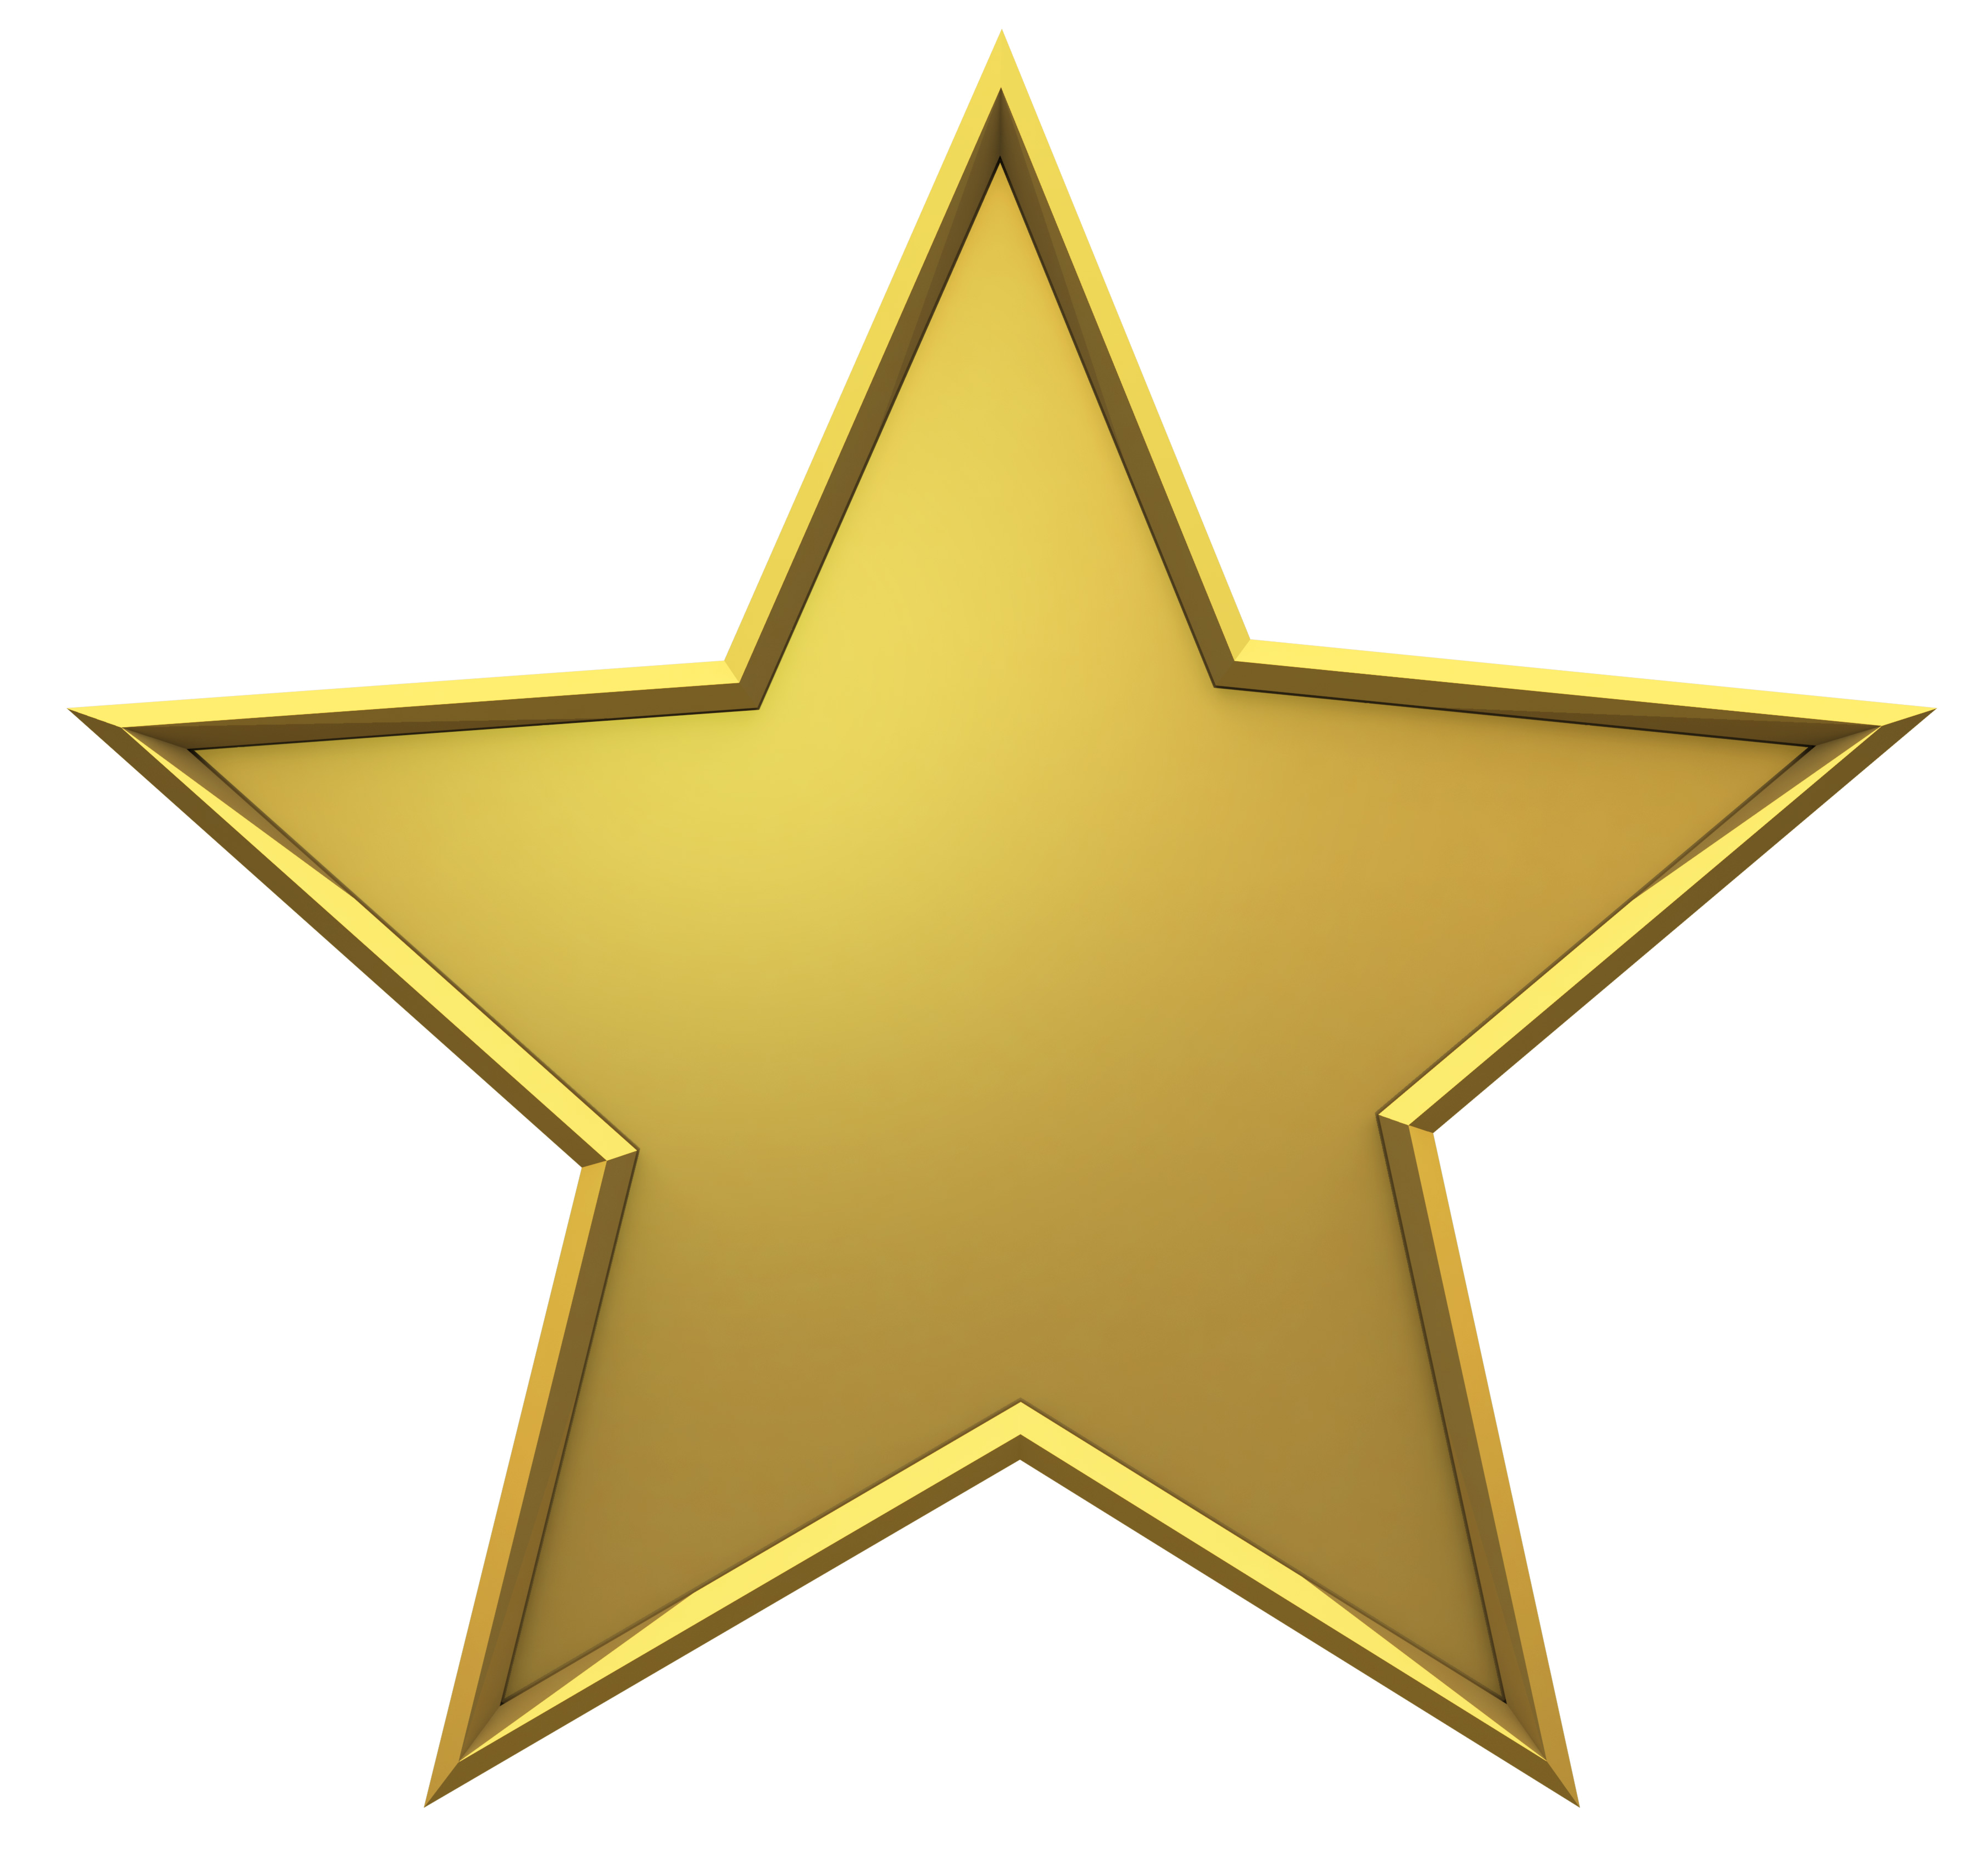 Large golden star to represent one-star quality requirements